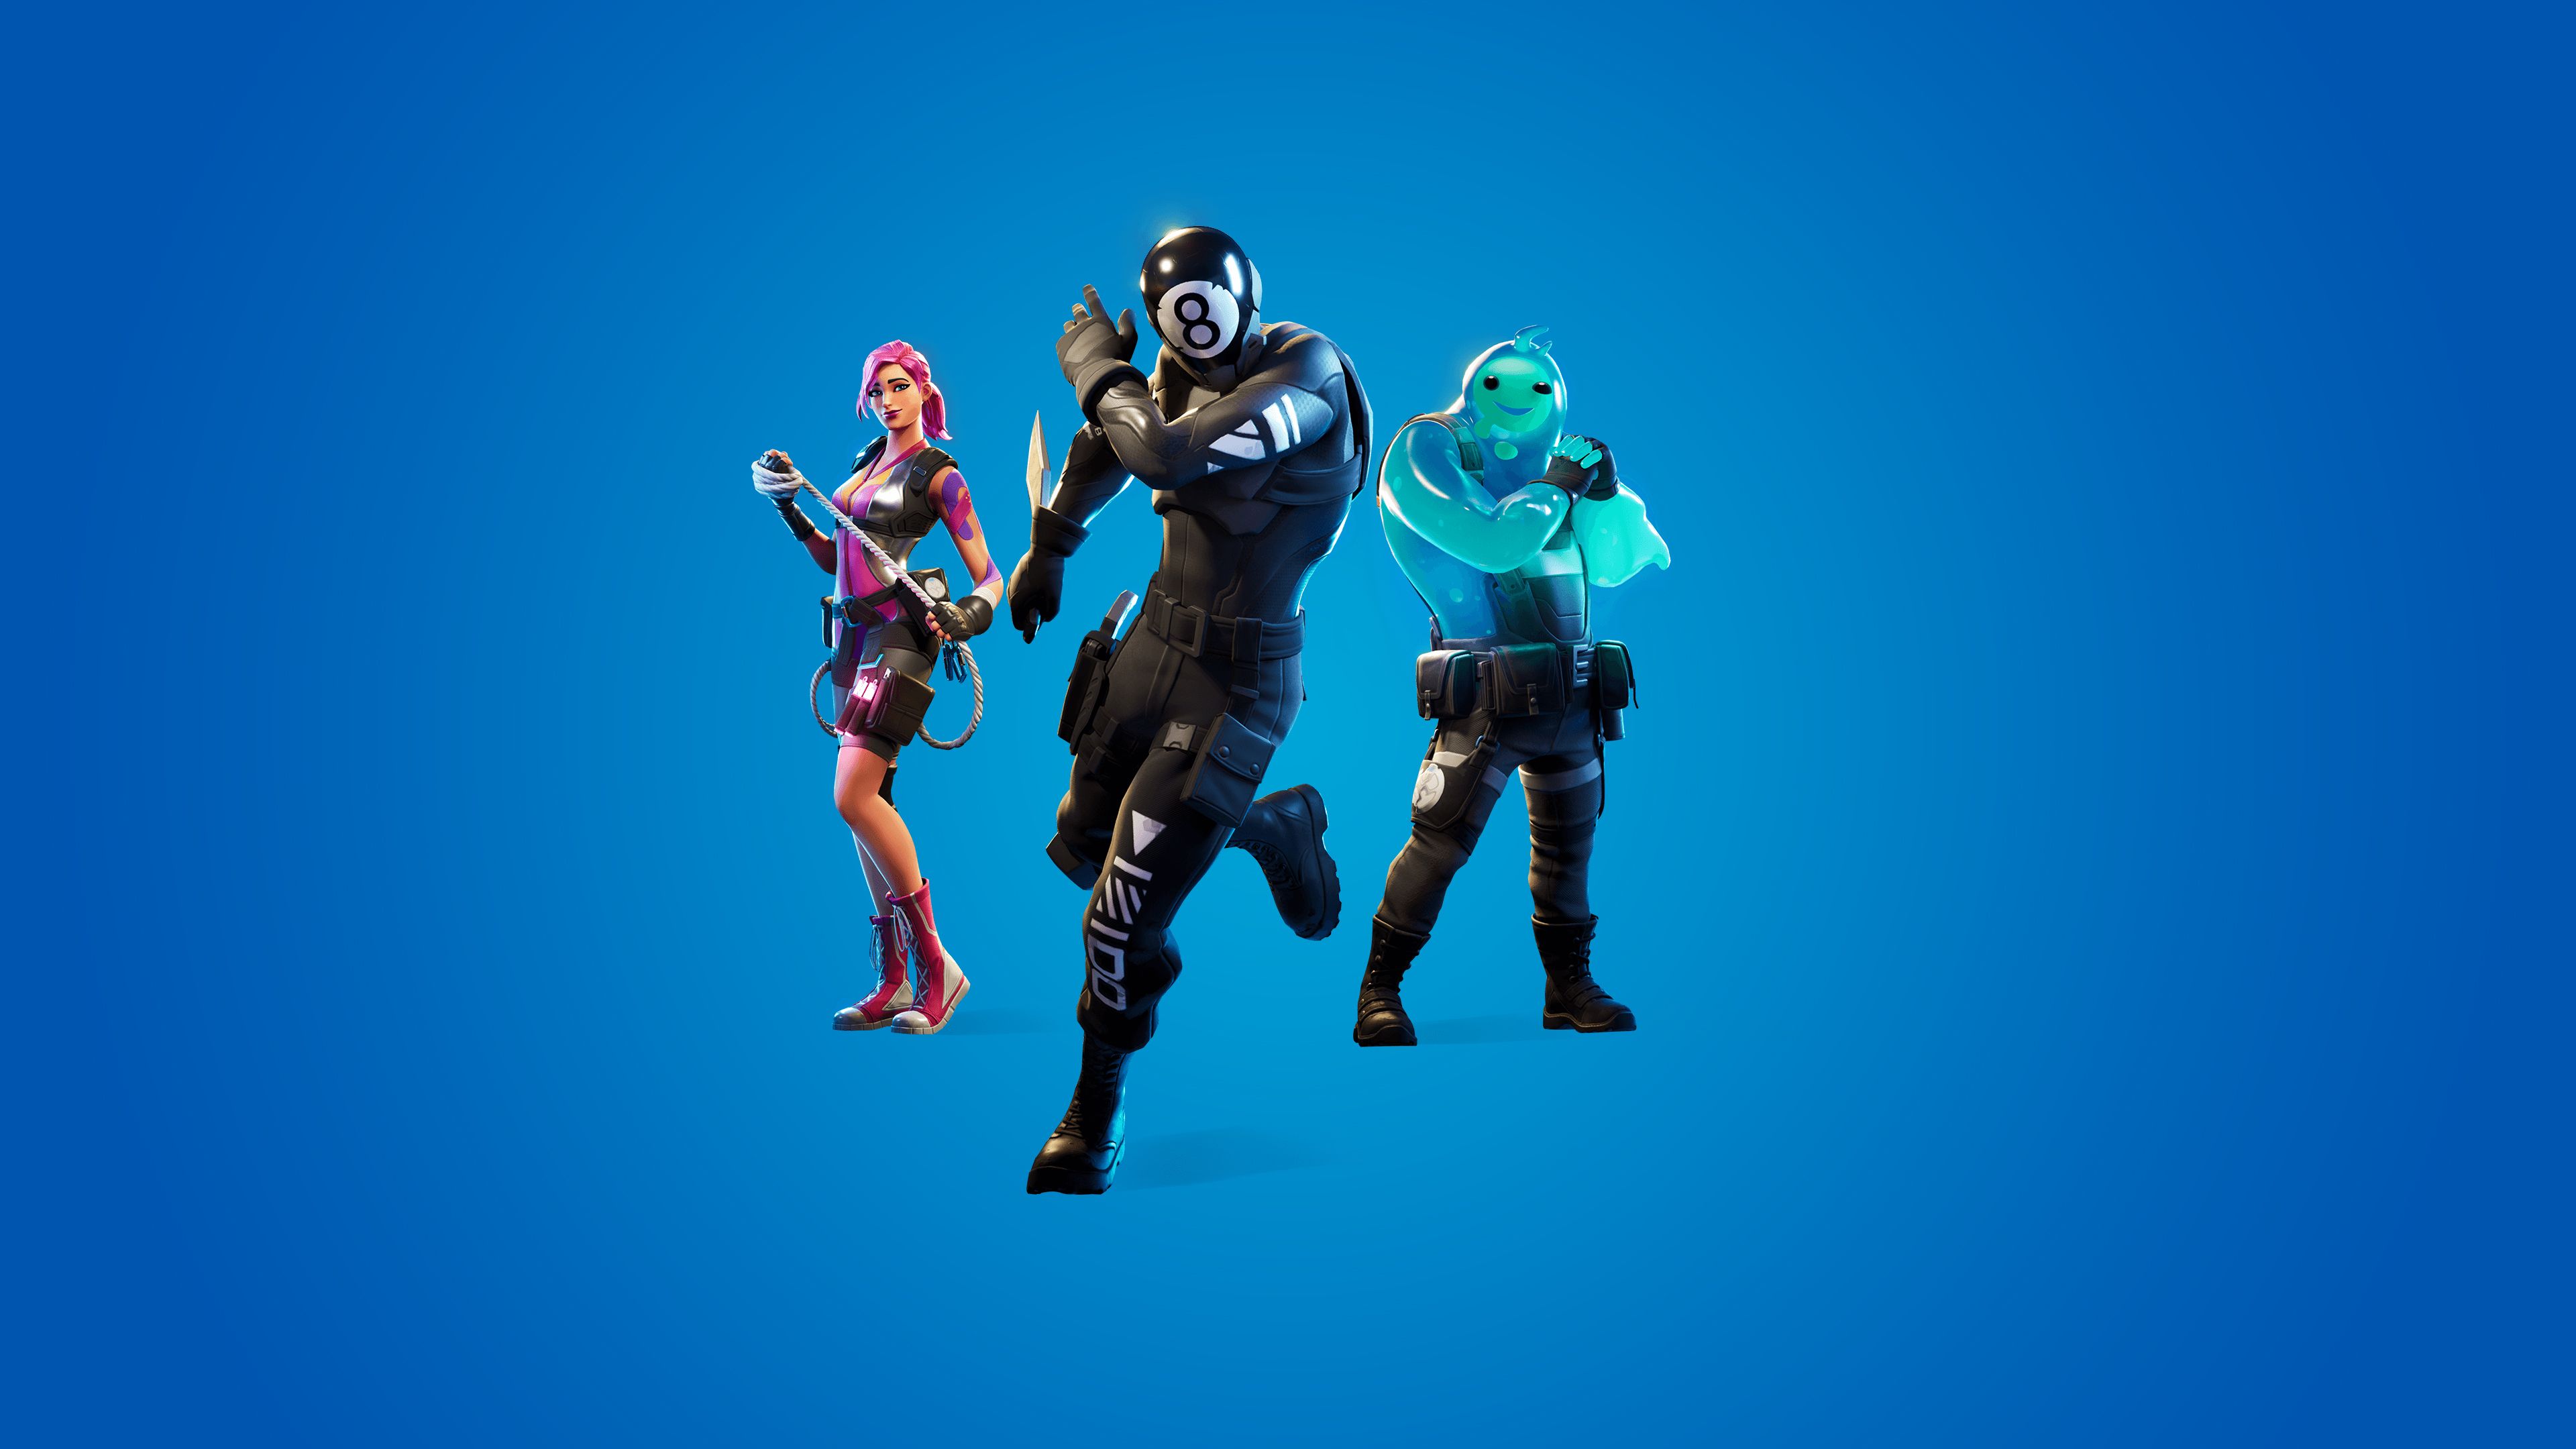 Fusion Fortnite Wallpapers